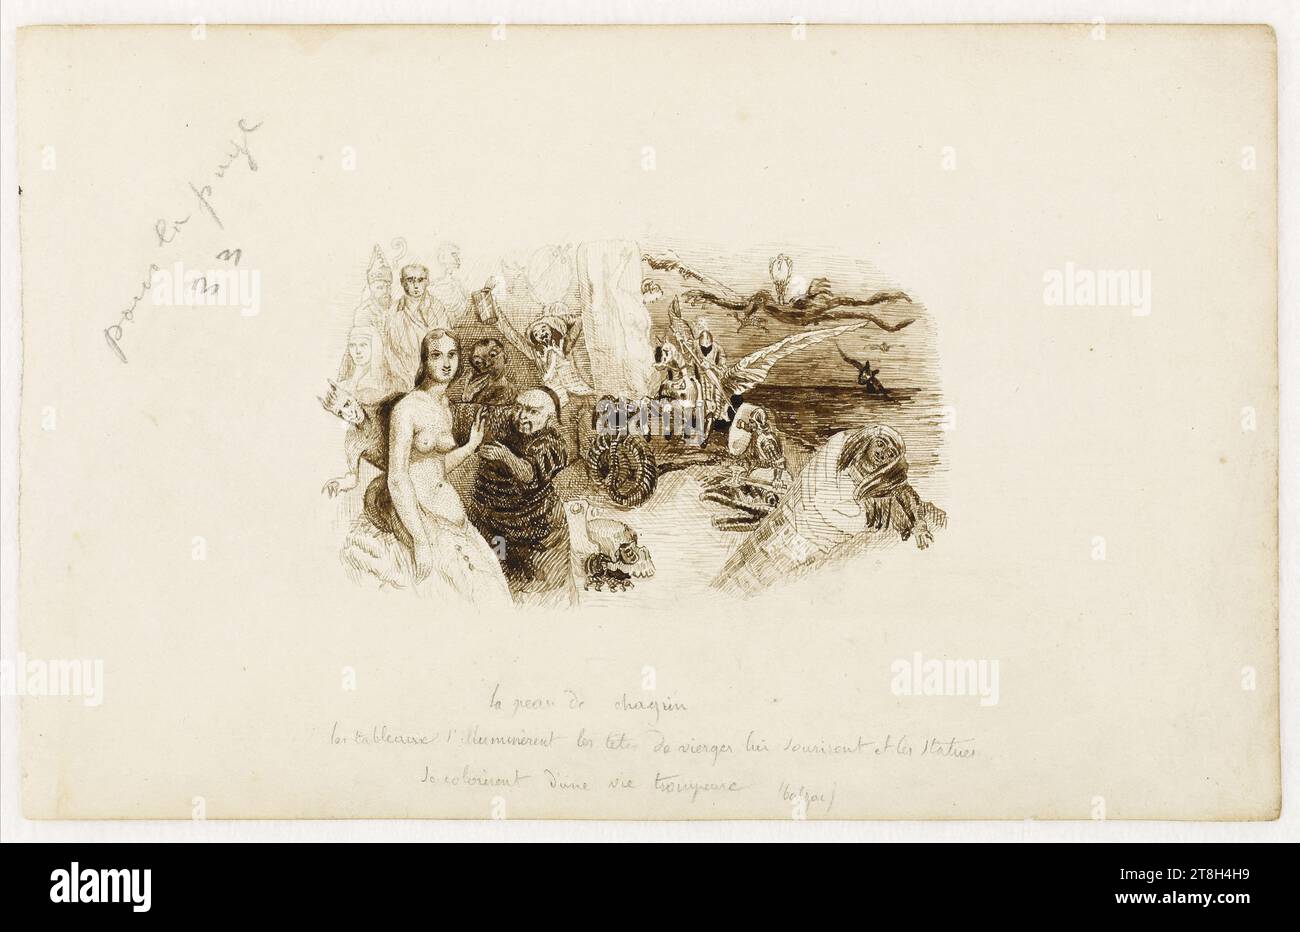 Rêverie fantastique, Draughtsman, Baron, Henri-Charles-Antoine, Draughtsman, Torlet, Adolphe, Aquafortist, 19th century, Graphic arts, Drawing, Ink, Vellum, Dimensions - Image:, Height: 13 cm, Width: 22 cm Stock Photo